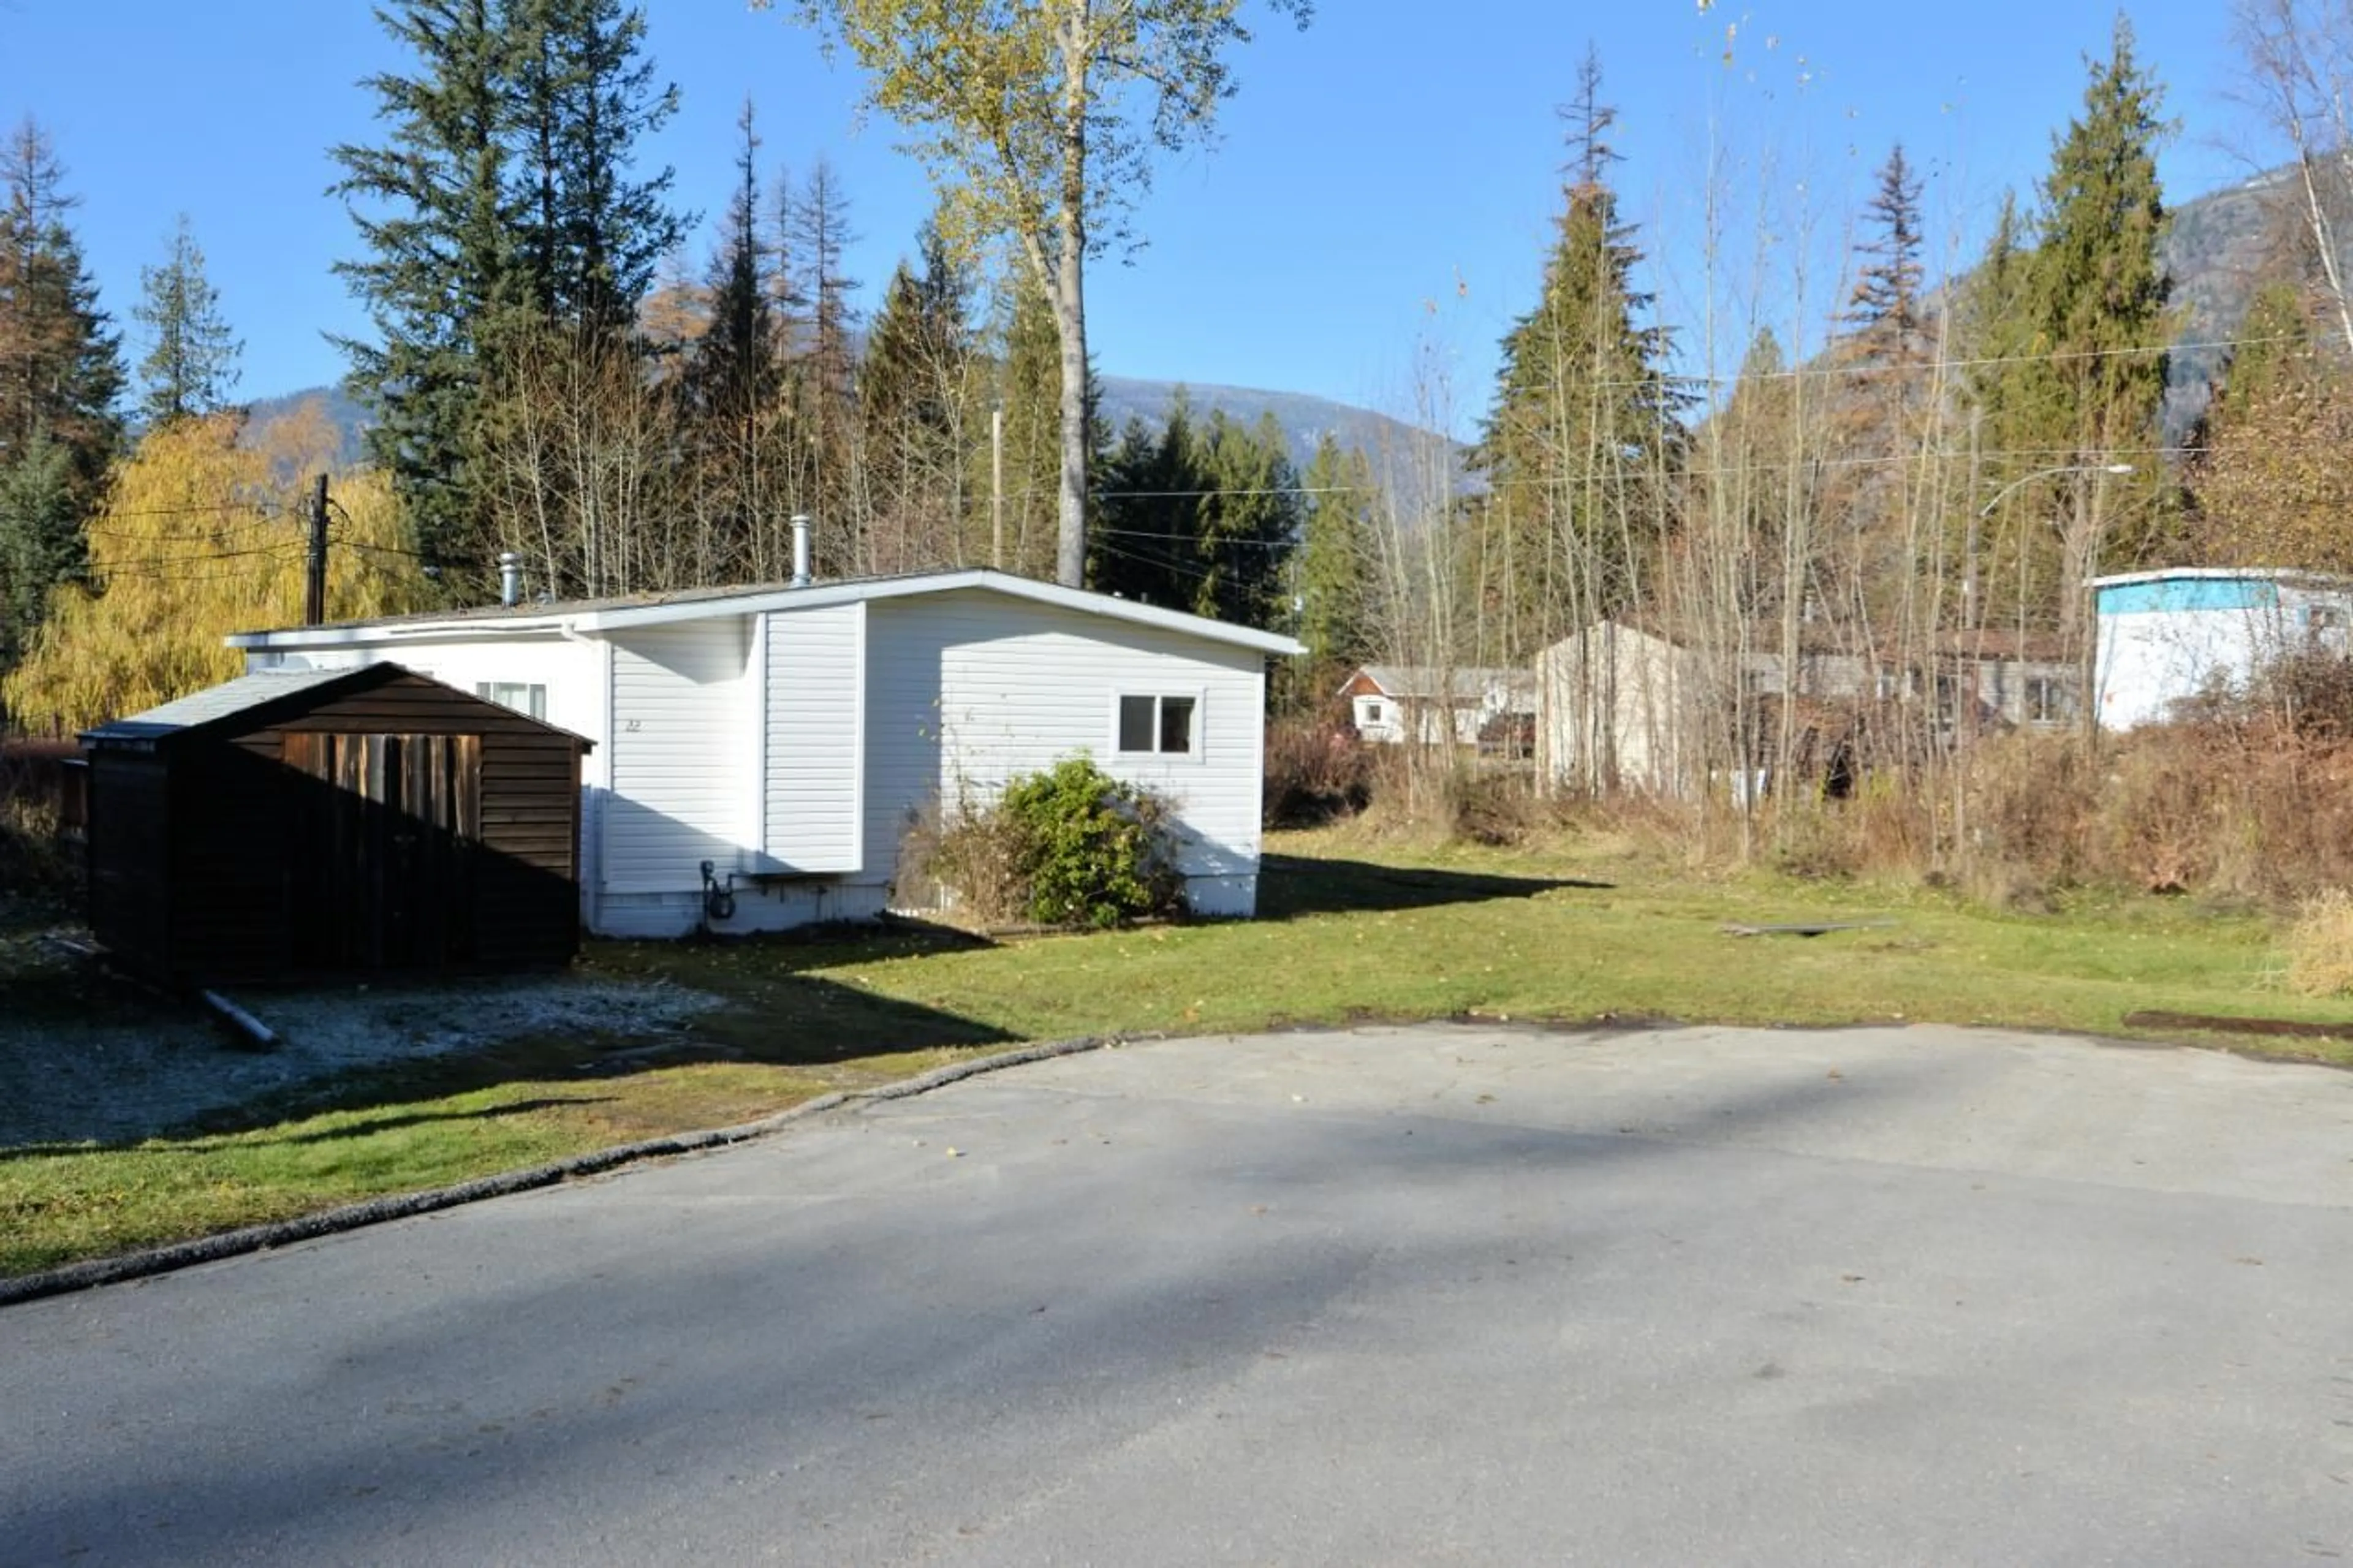 Frontside or backside of a home for 22 - 1000 INNES STREET W, Nelson British Columbia V1L7A3